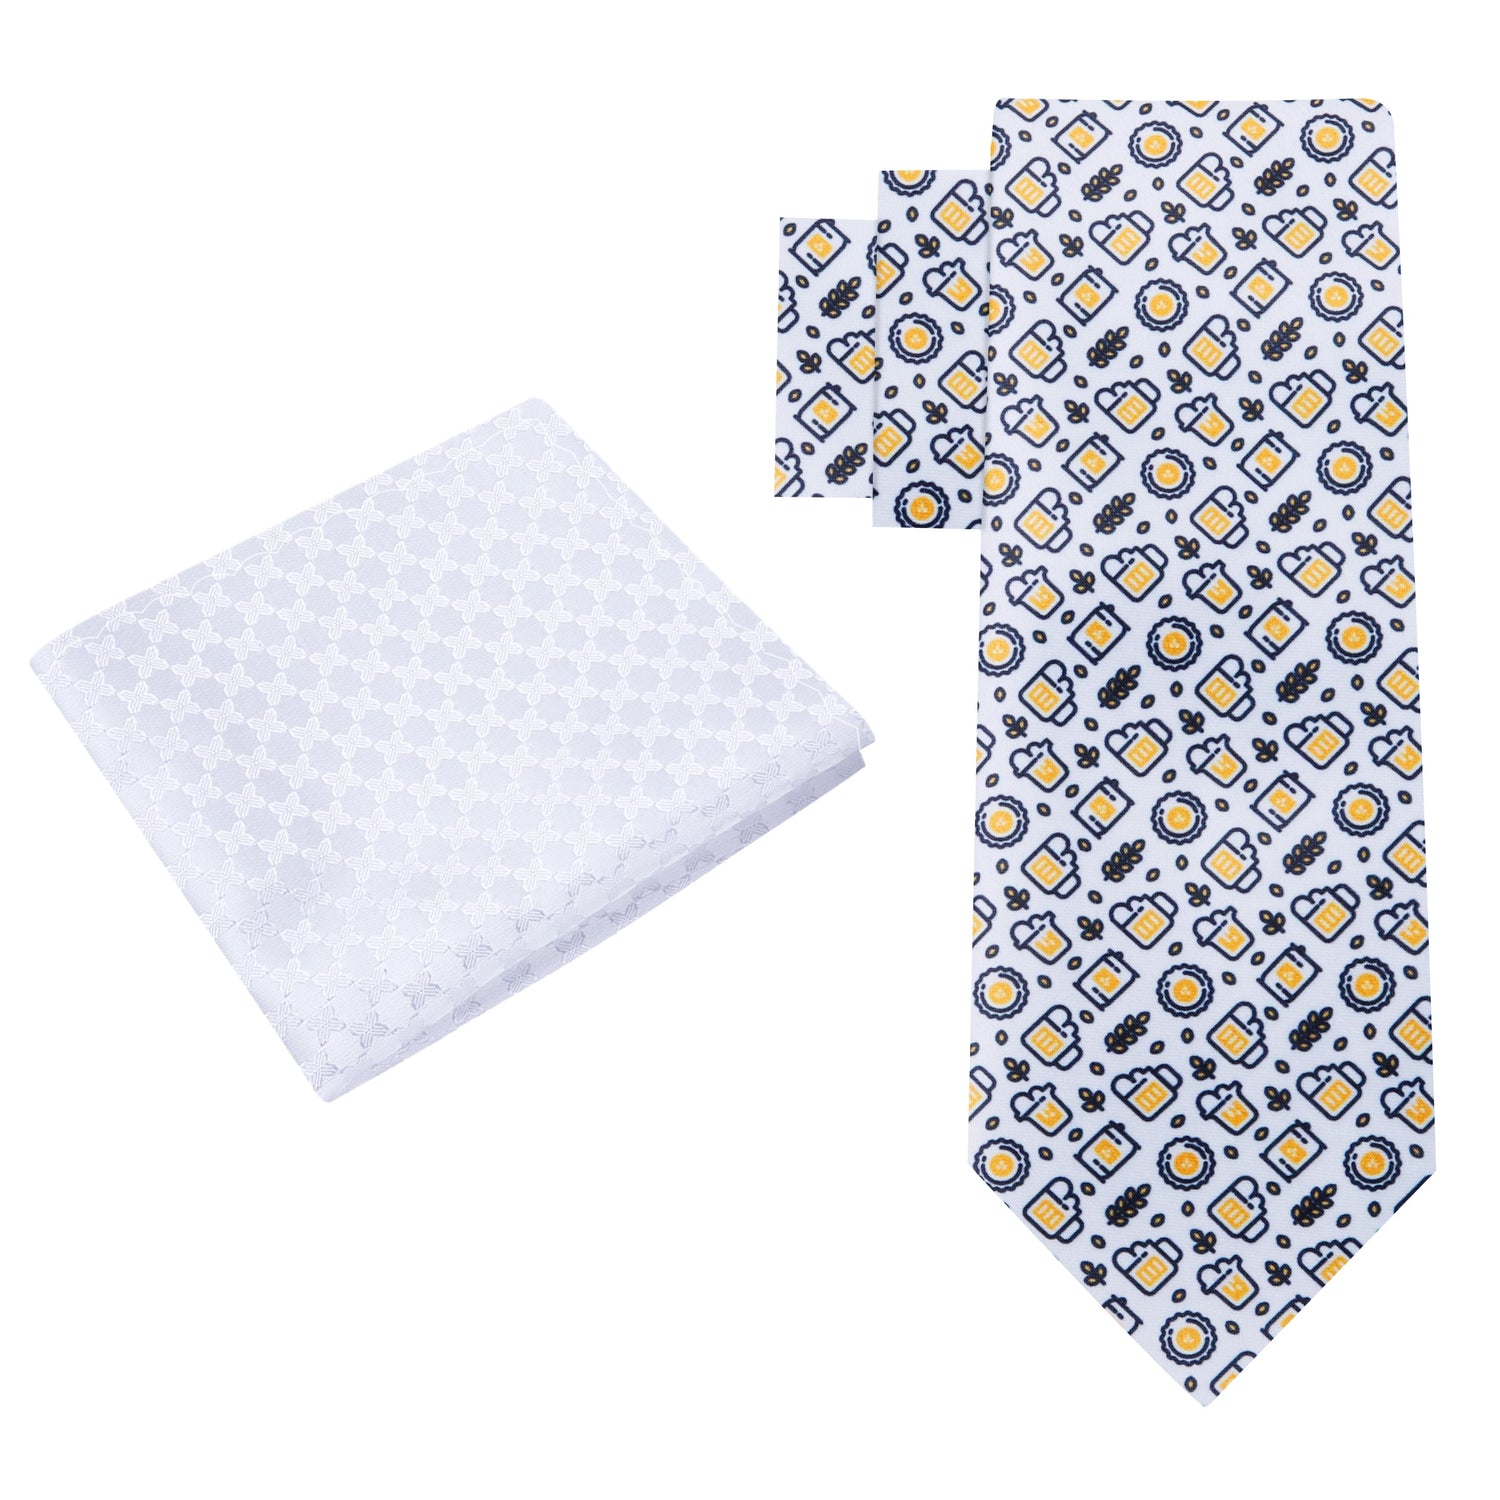 Alt View: White, Yellow, Black Beer Themed Silk Tie and Pocket Square